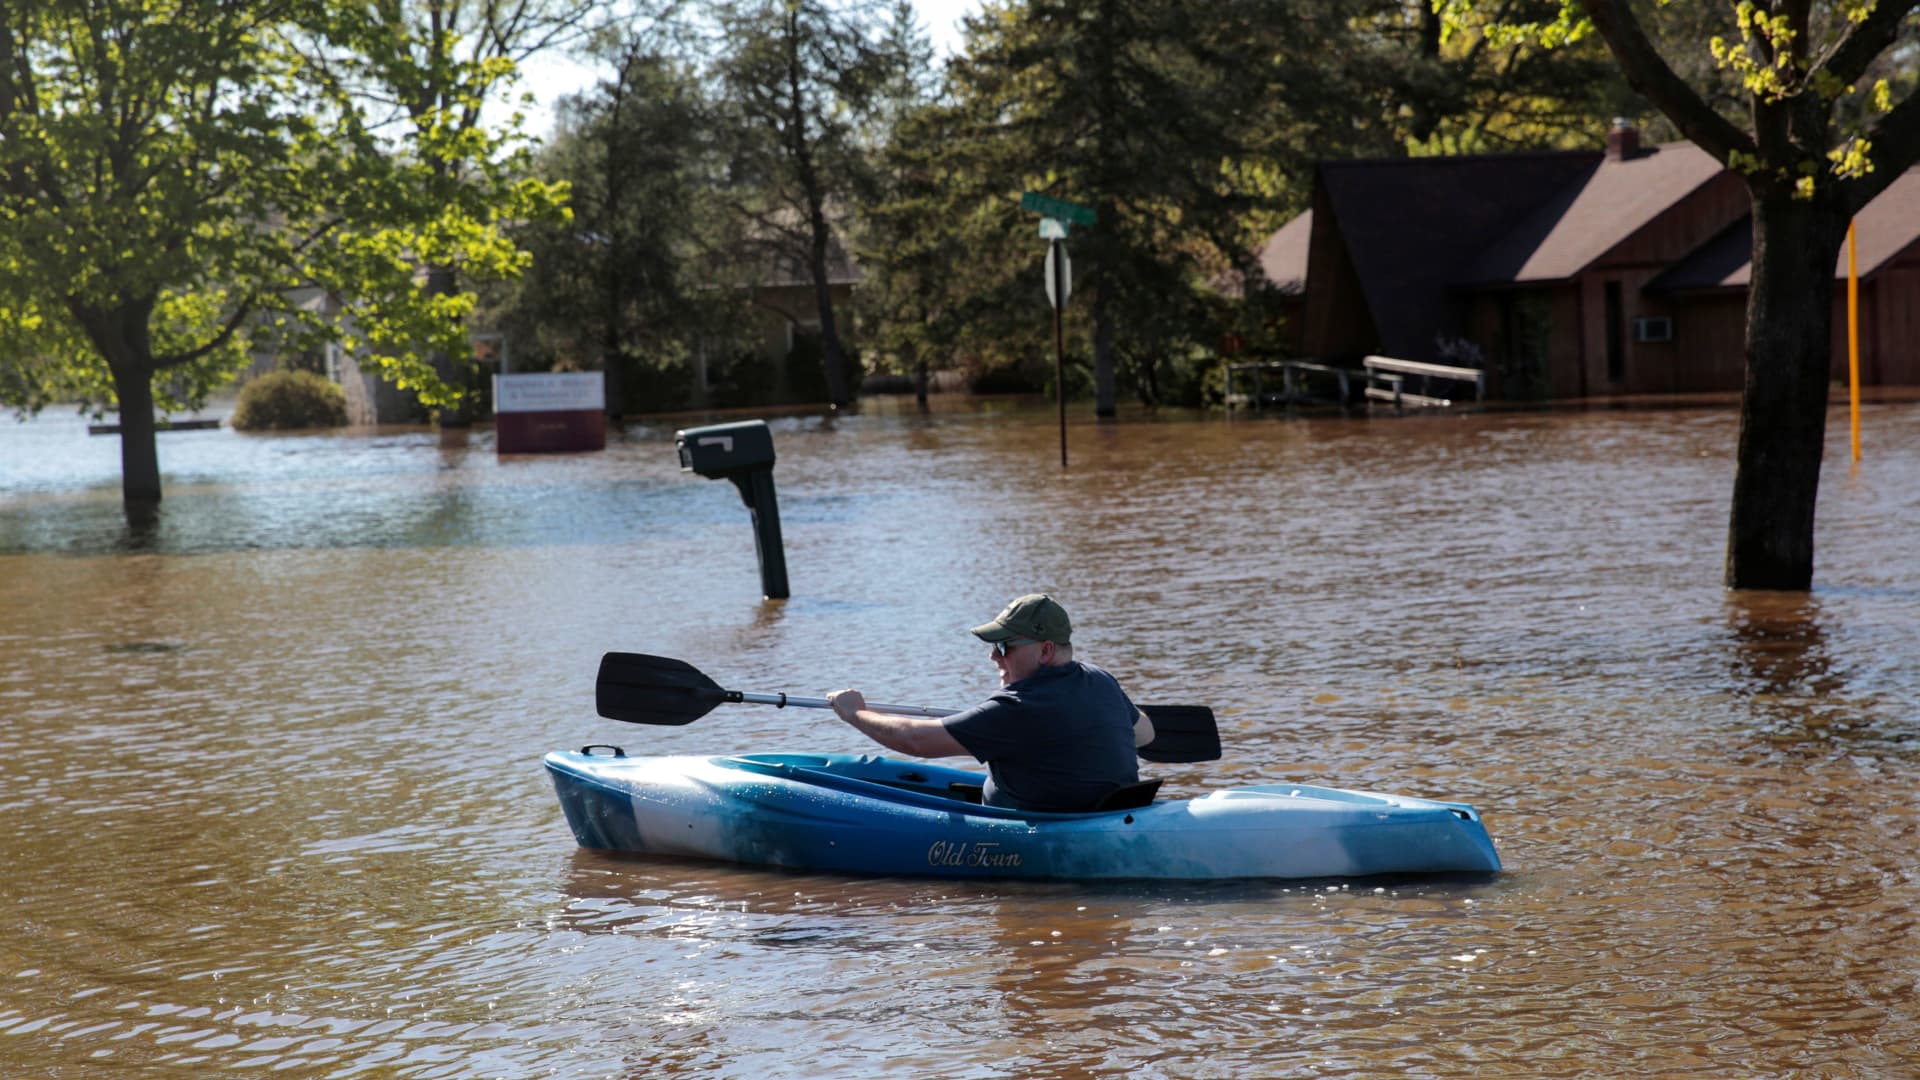 National Flood Insurance Program is over $20 billion in debt. Here's why and how that's creating an investment opportunity